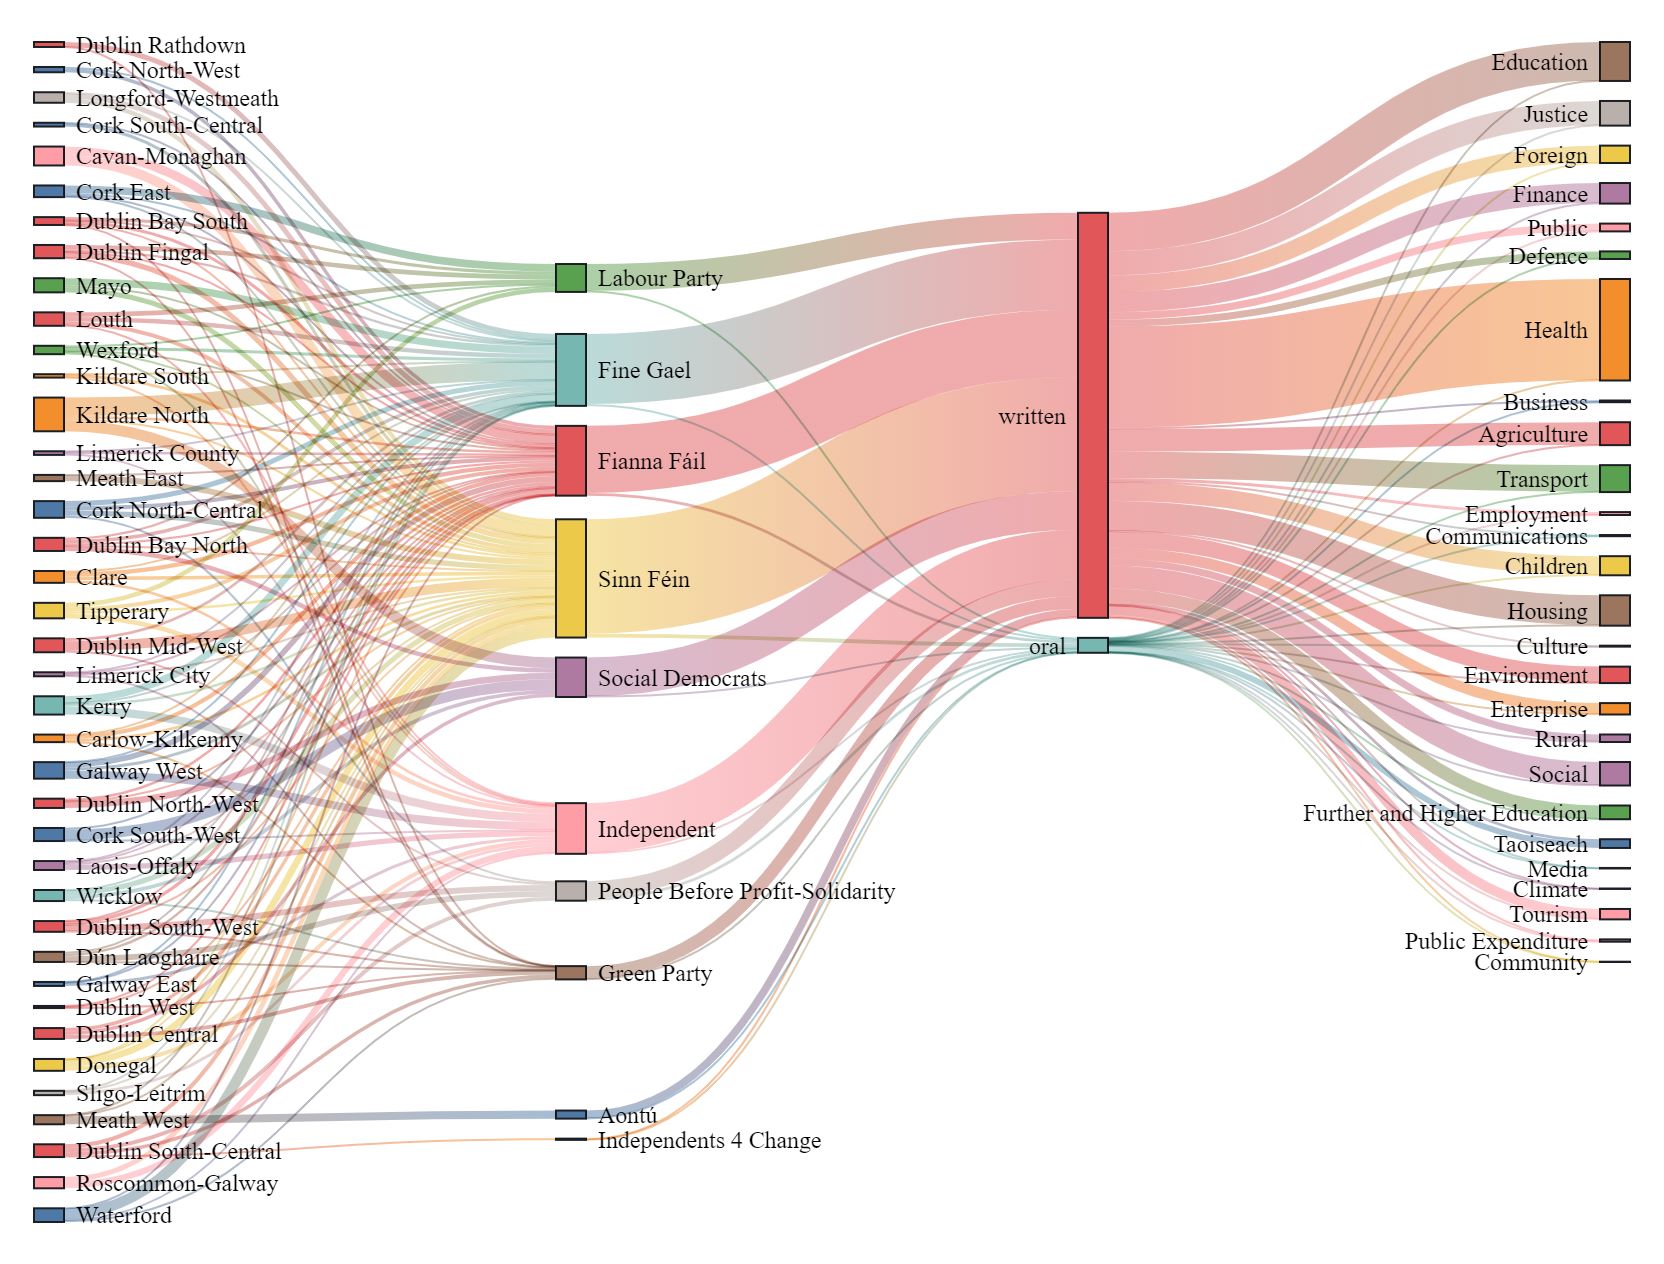 A sankey diagram depicting the number of parliamentary questions asked in the 33rd Dáil detailing constituency, party, question type and Department